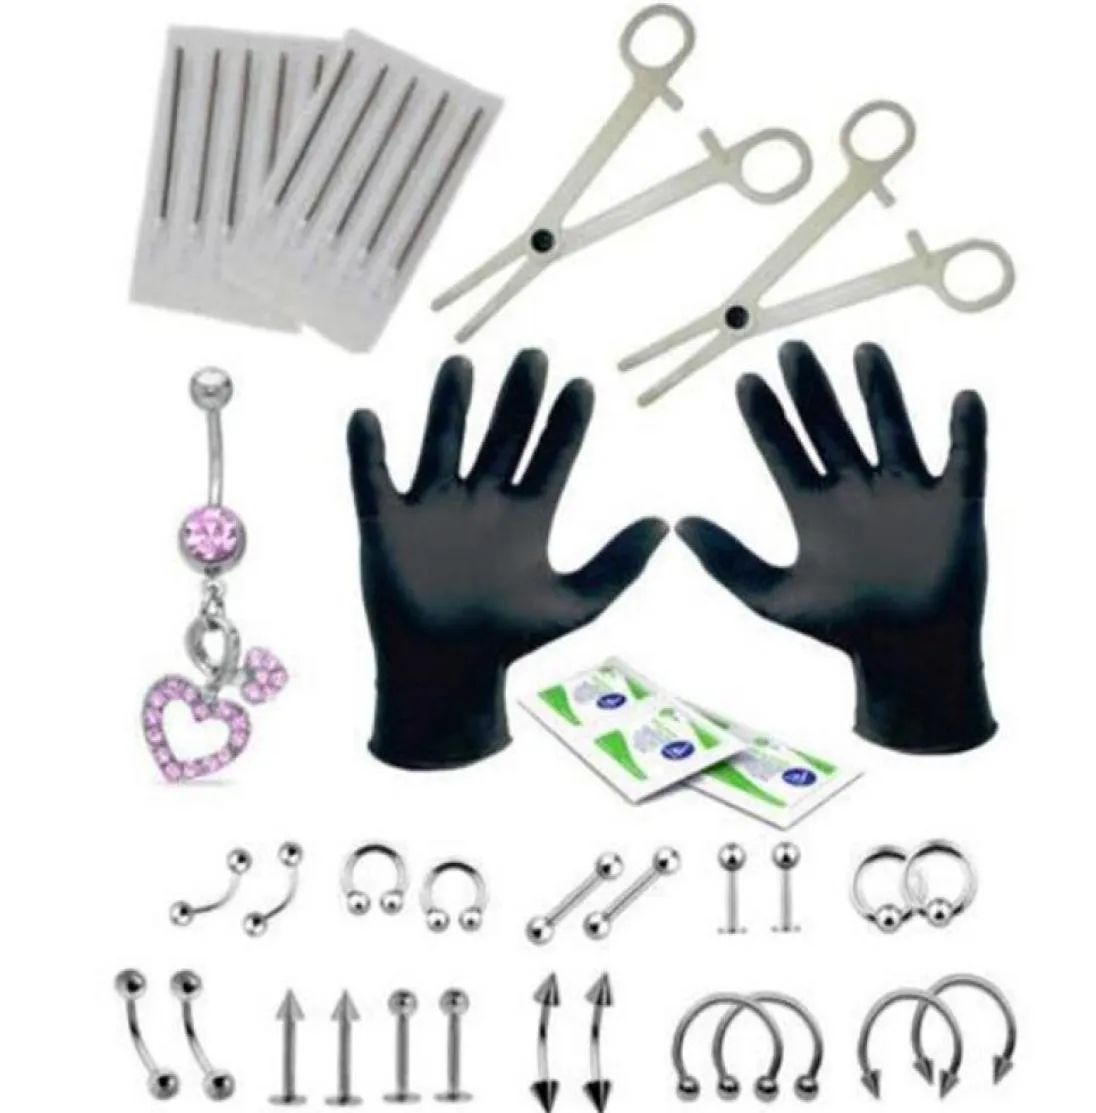 41pcs Piercing Kit Medical Stainless Steel Material Stud For Eyebrow Nose Belly Lips Tongue Piercing Various Equipment For Specifi6653757